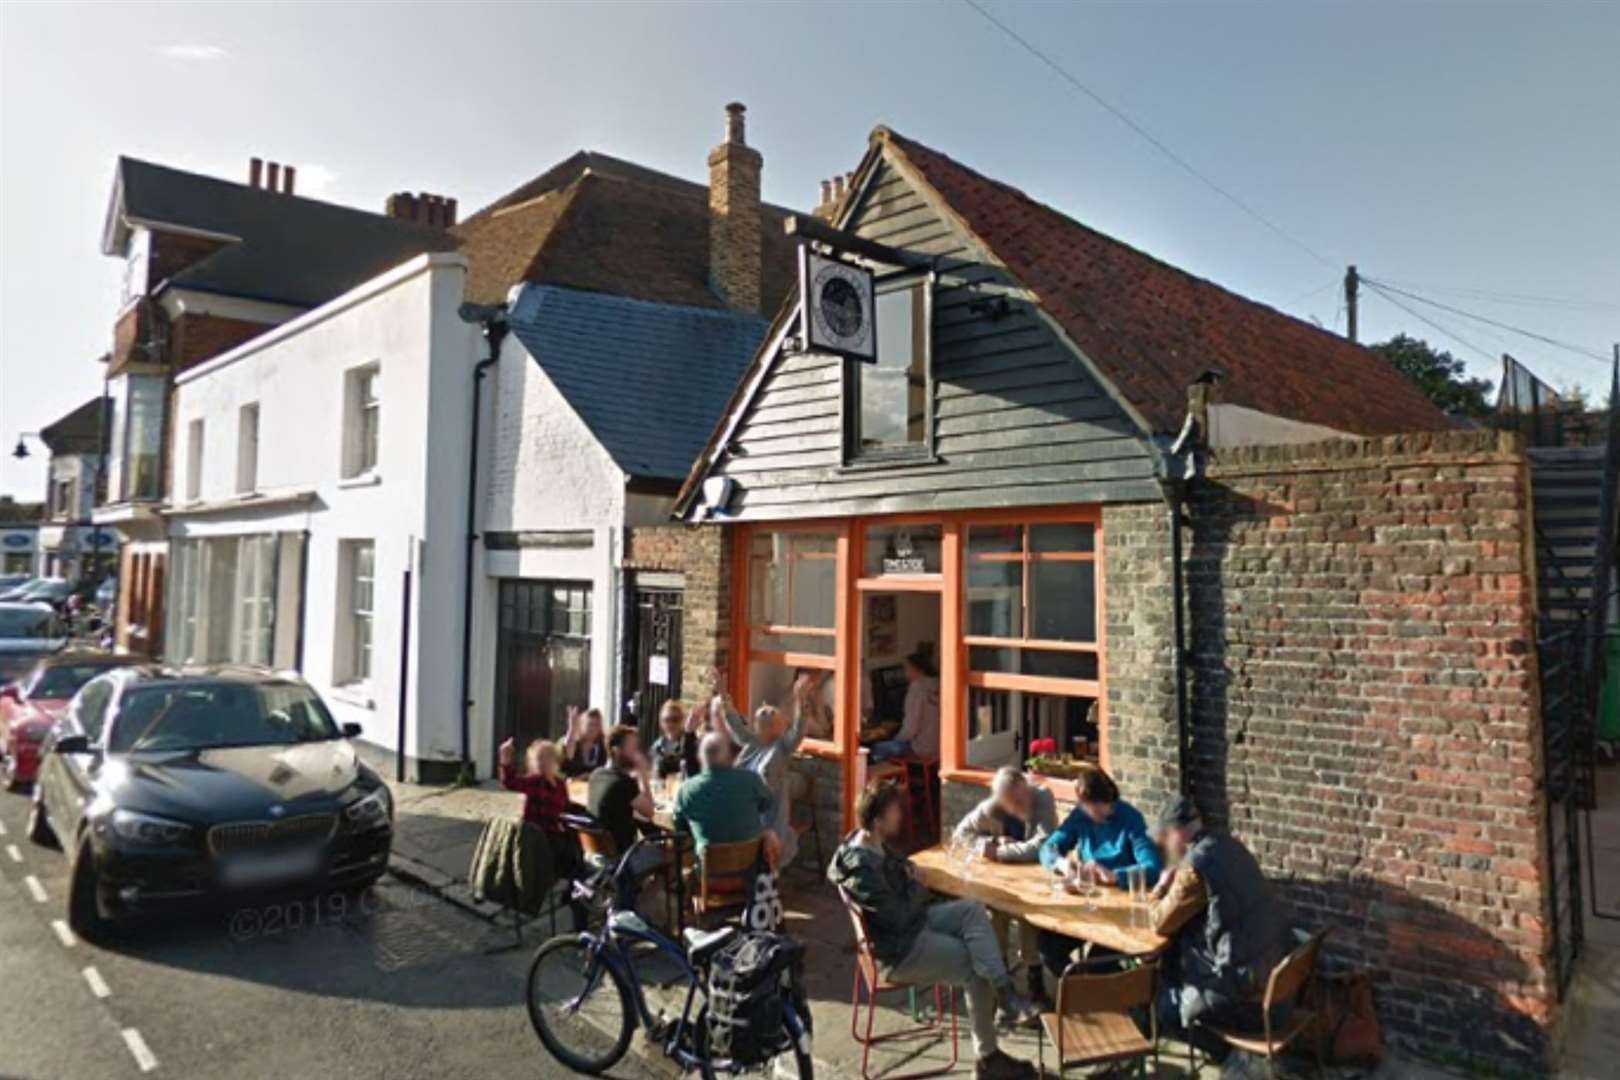 The Smugglers Beer and Music Cafe will be taken over next month. Picture: Google